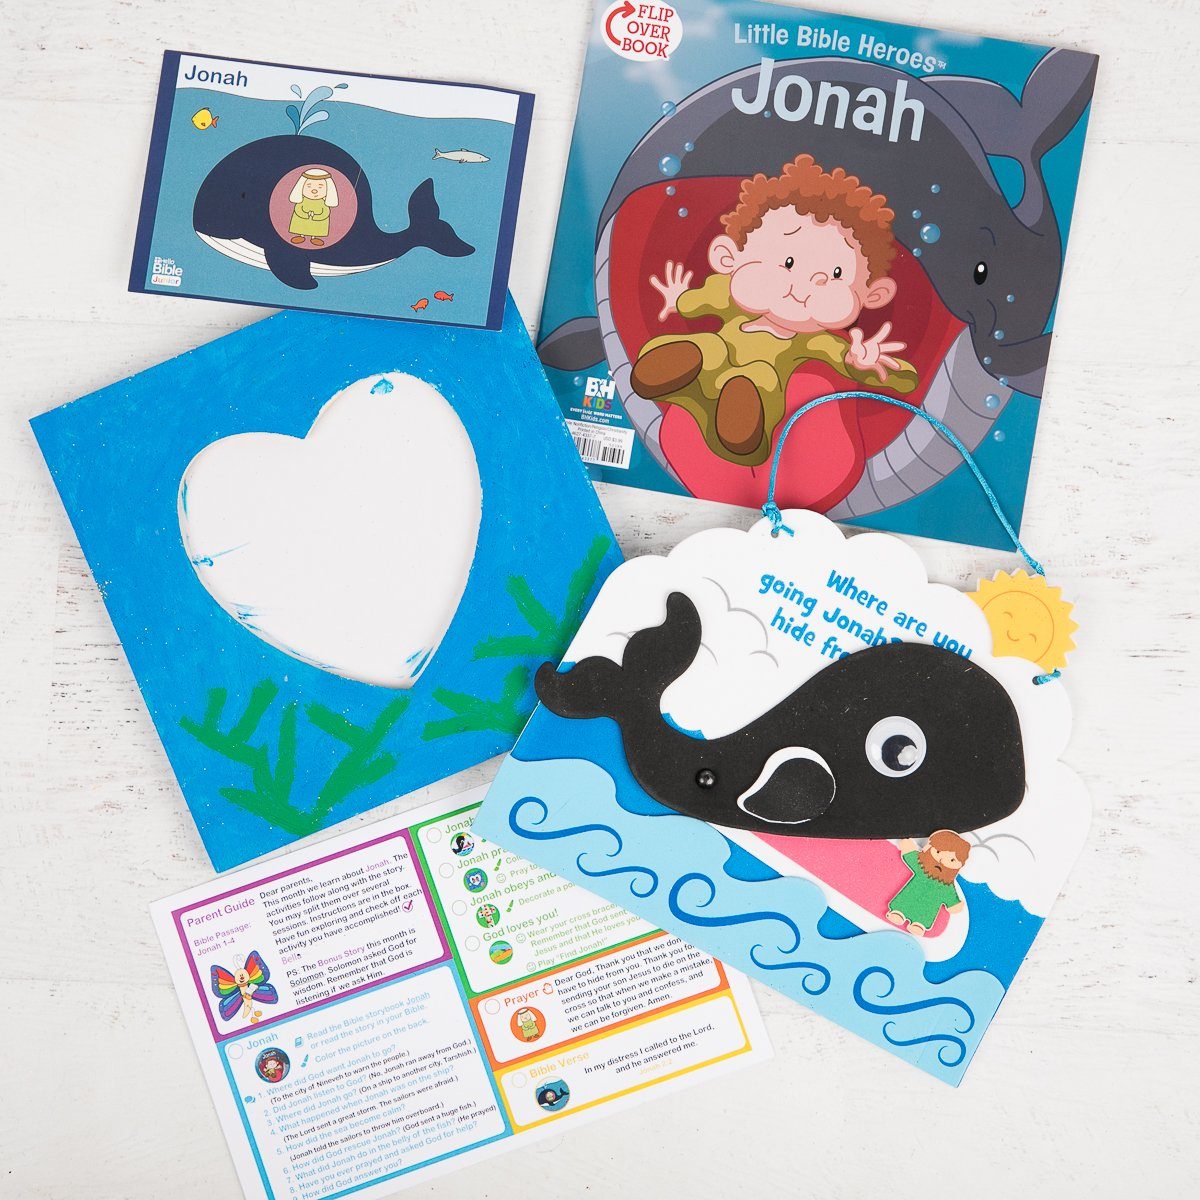 HelloBible Junior (ages 3-5) - Story of JONAH